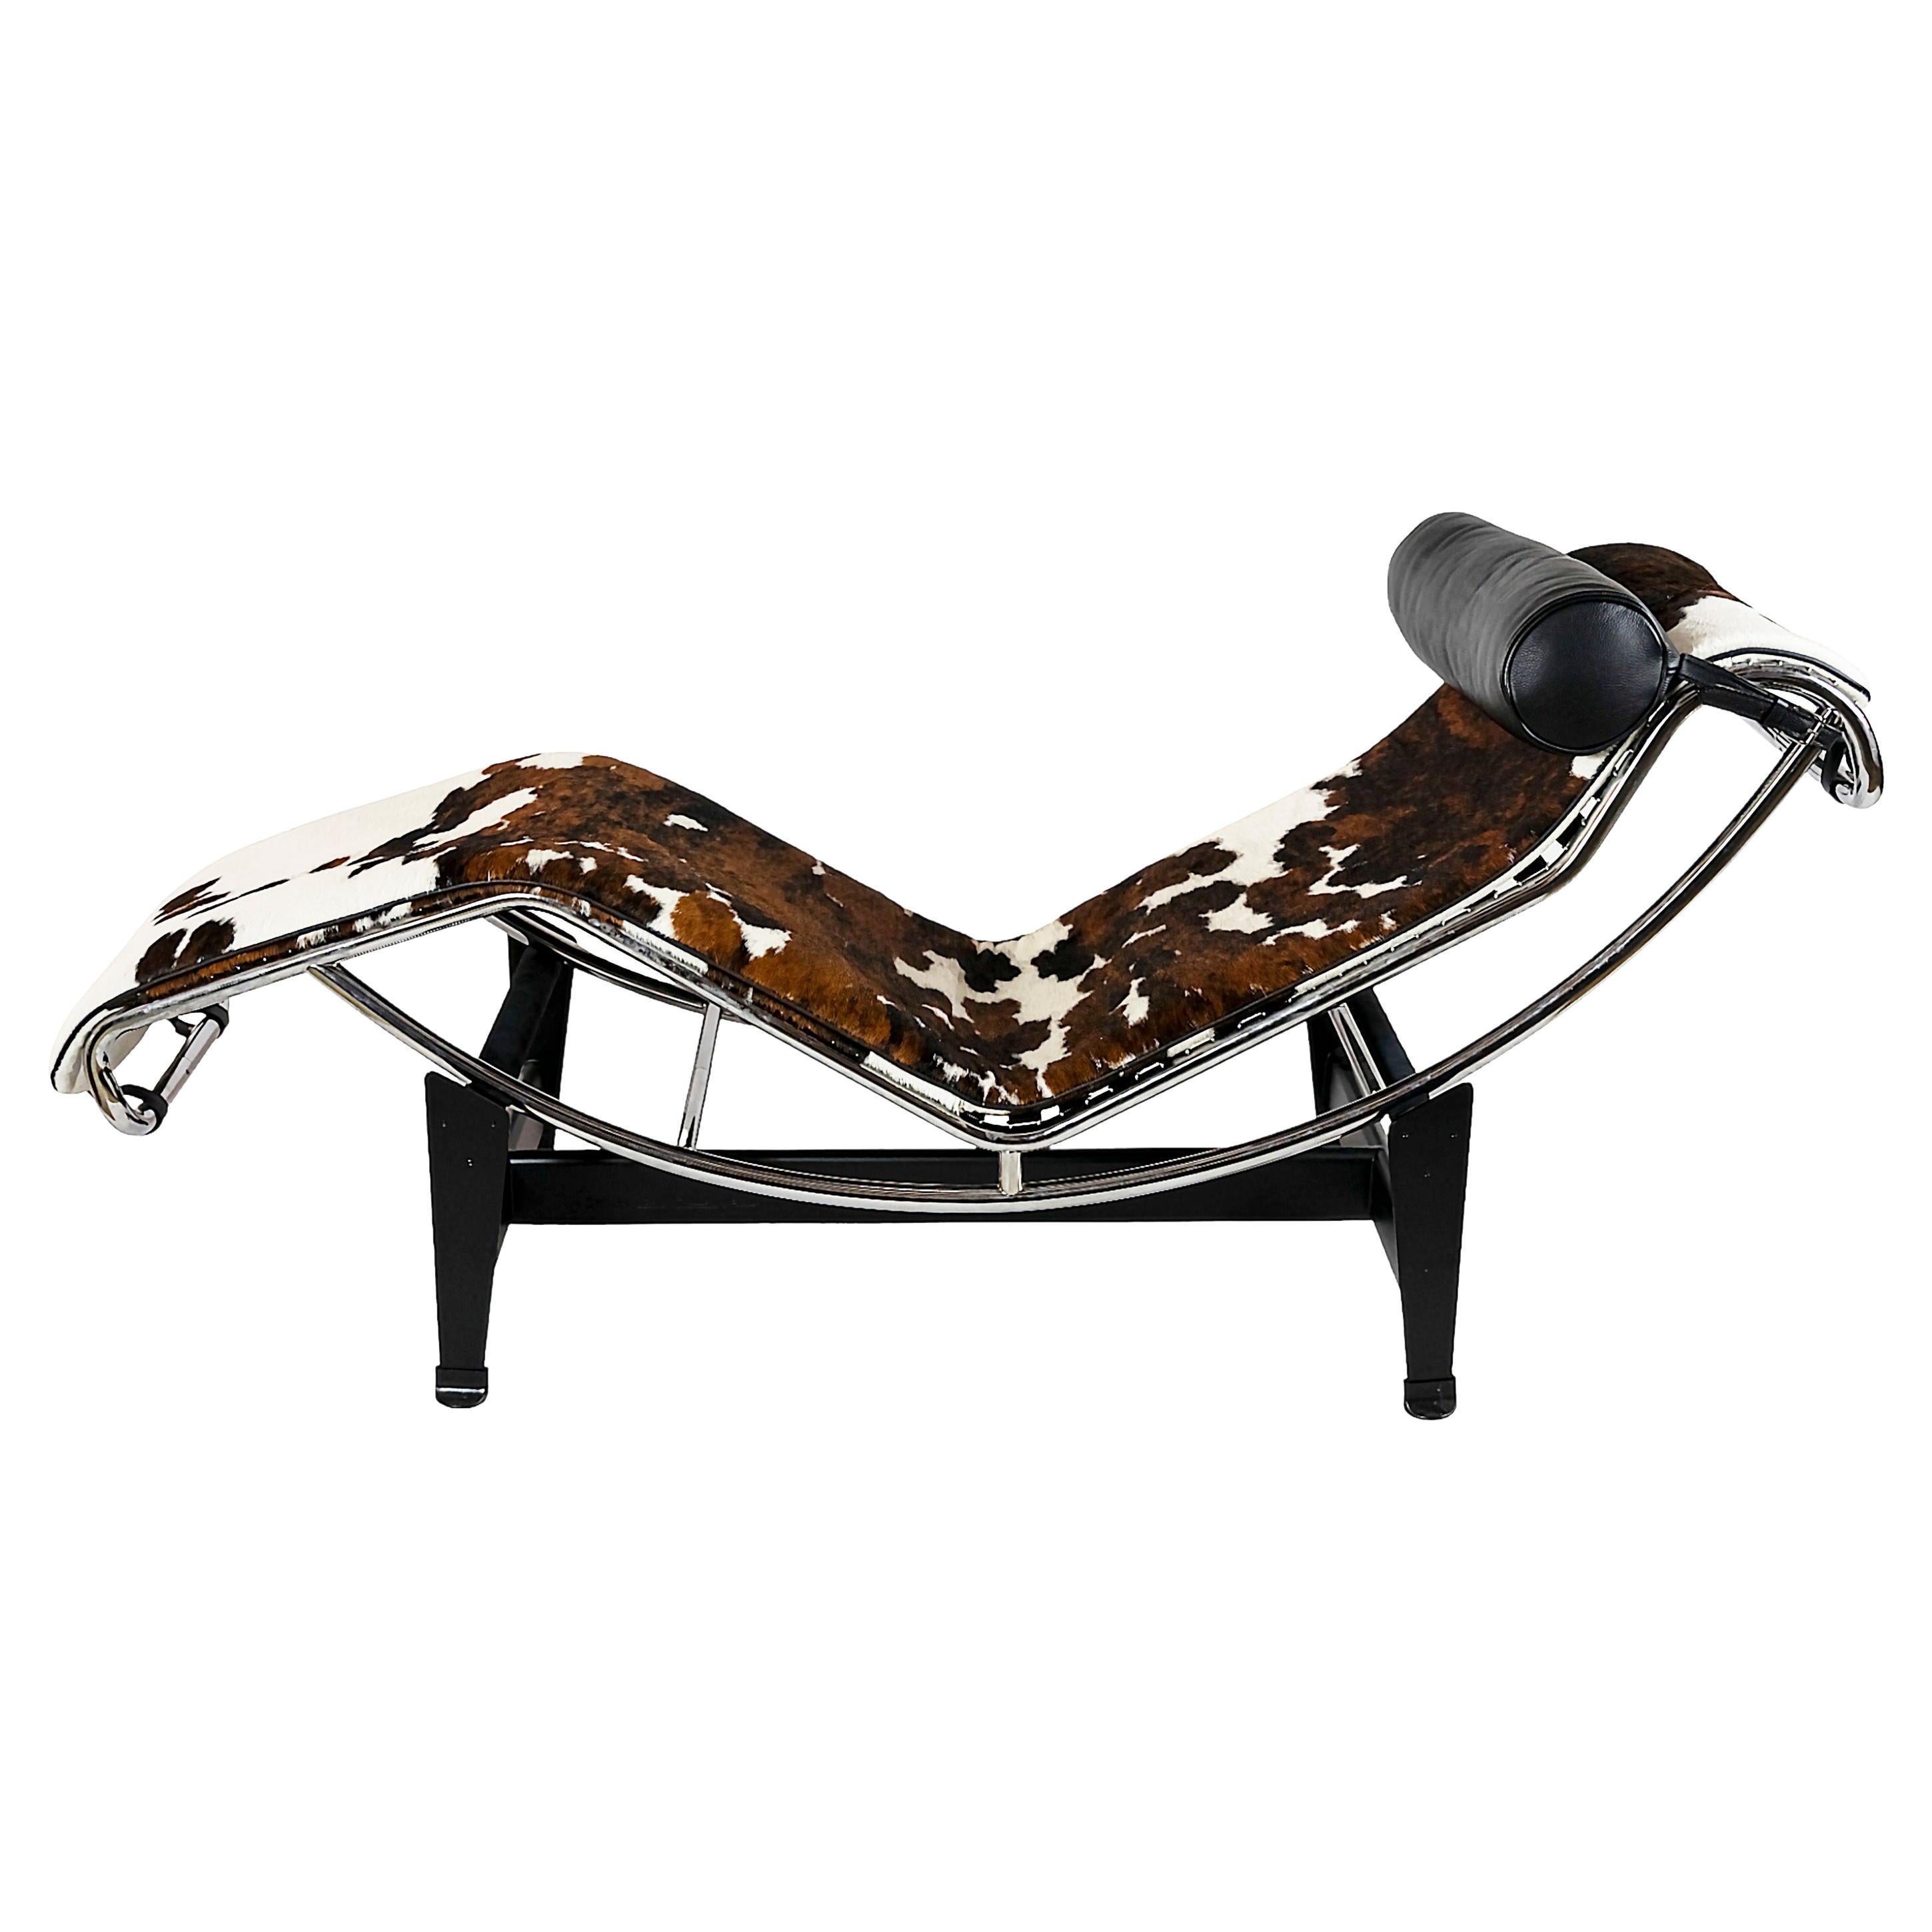 Vintage Le Corbusier, Pierre Jeanneret, Charlotte Perriand chaise lounge  LC4 created in 1928's.
Manufacture by Cassina edition circa 2010.
In natural cow/pony fur, black leather pillow, chromed steel tube frame, black base/legs.
Stamped and